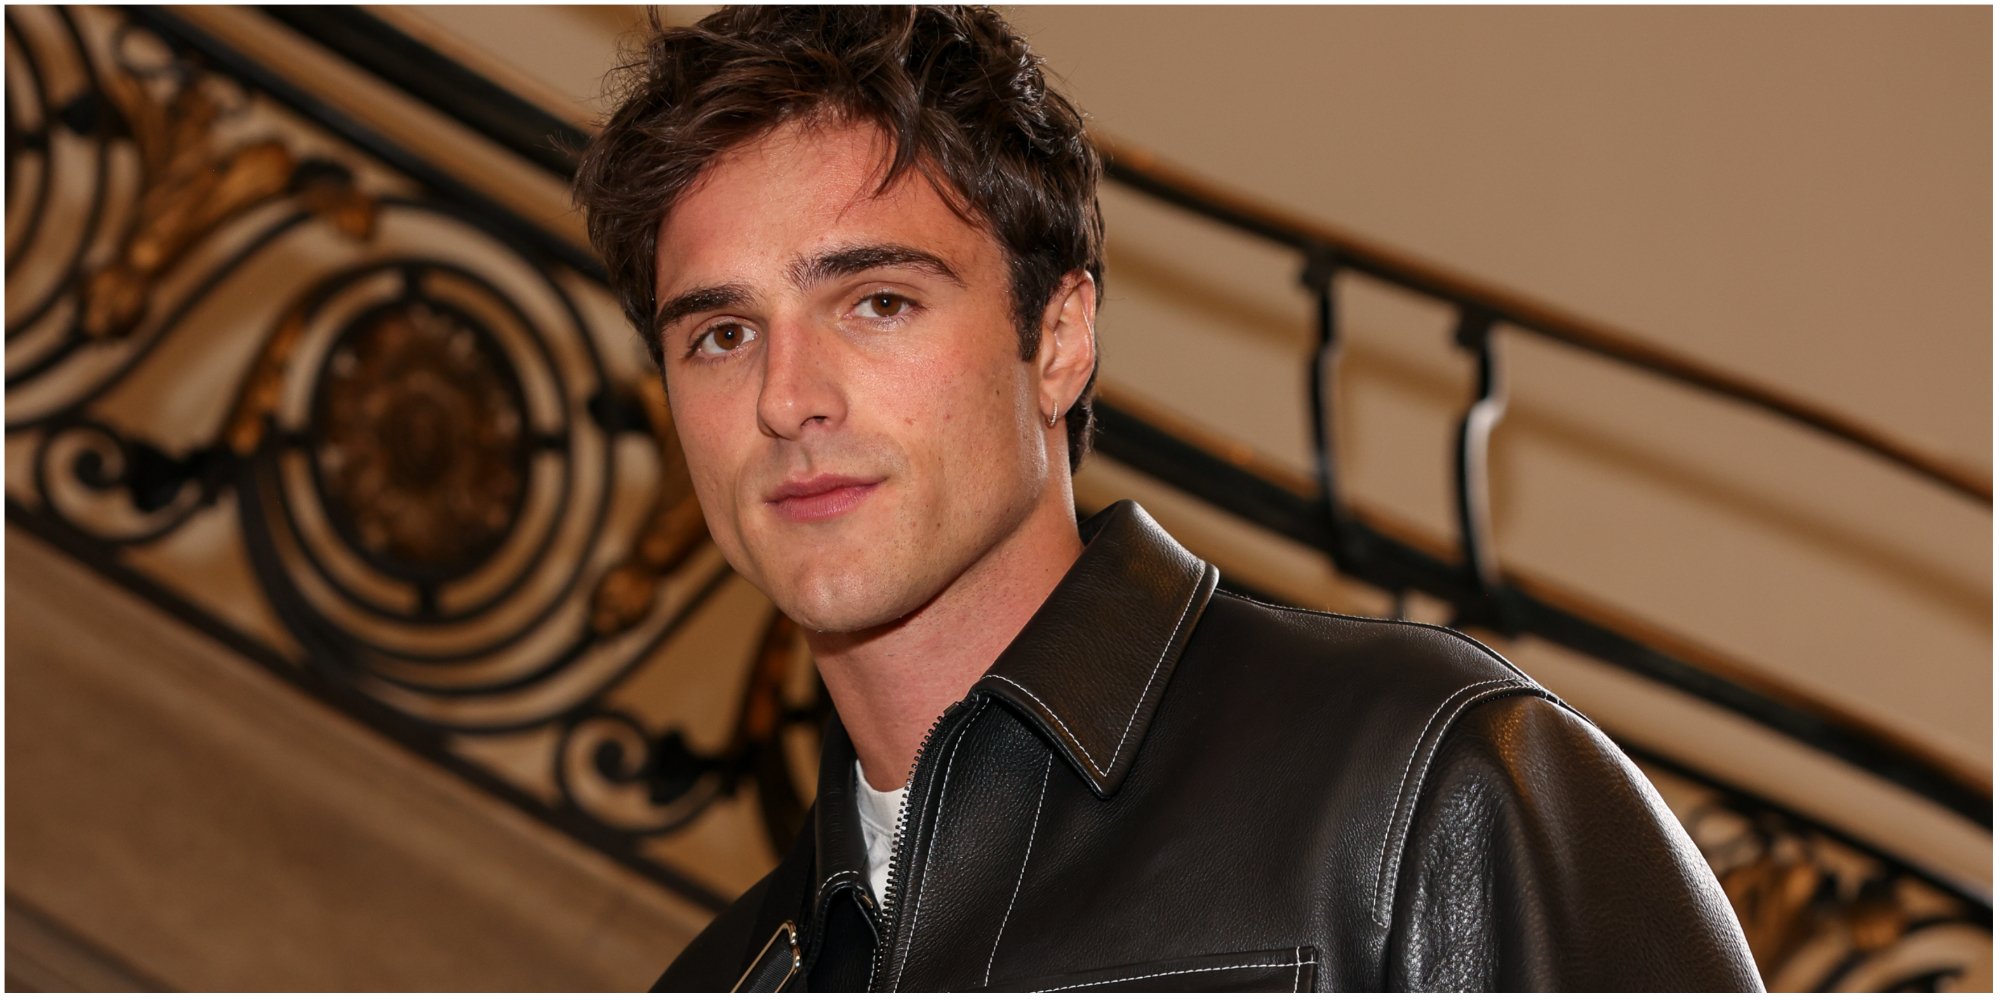 Jacob Elordi will star as Elvis Presley in the feature film 'Priscilla.'